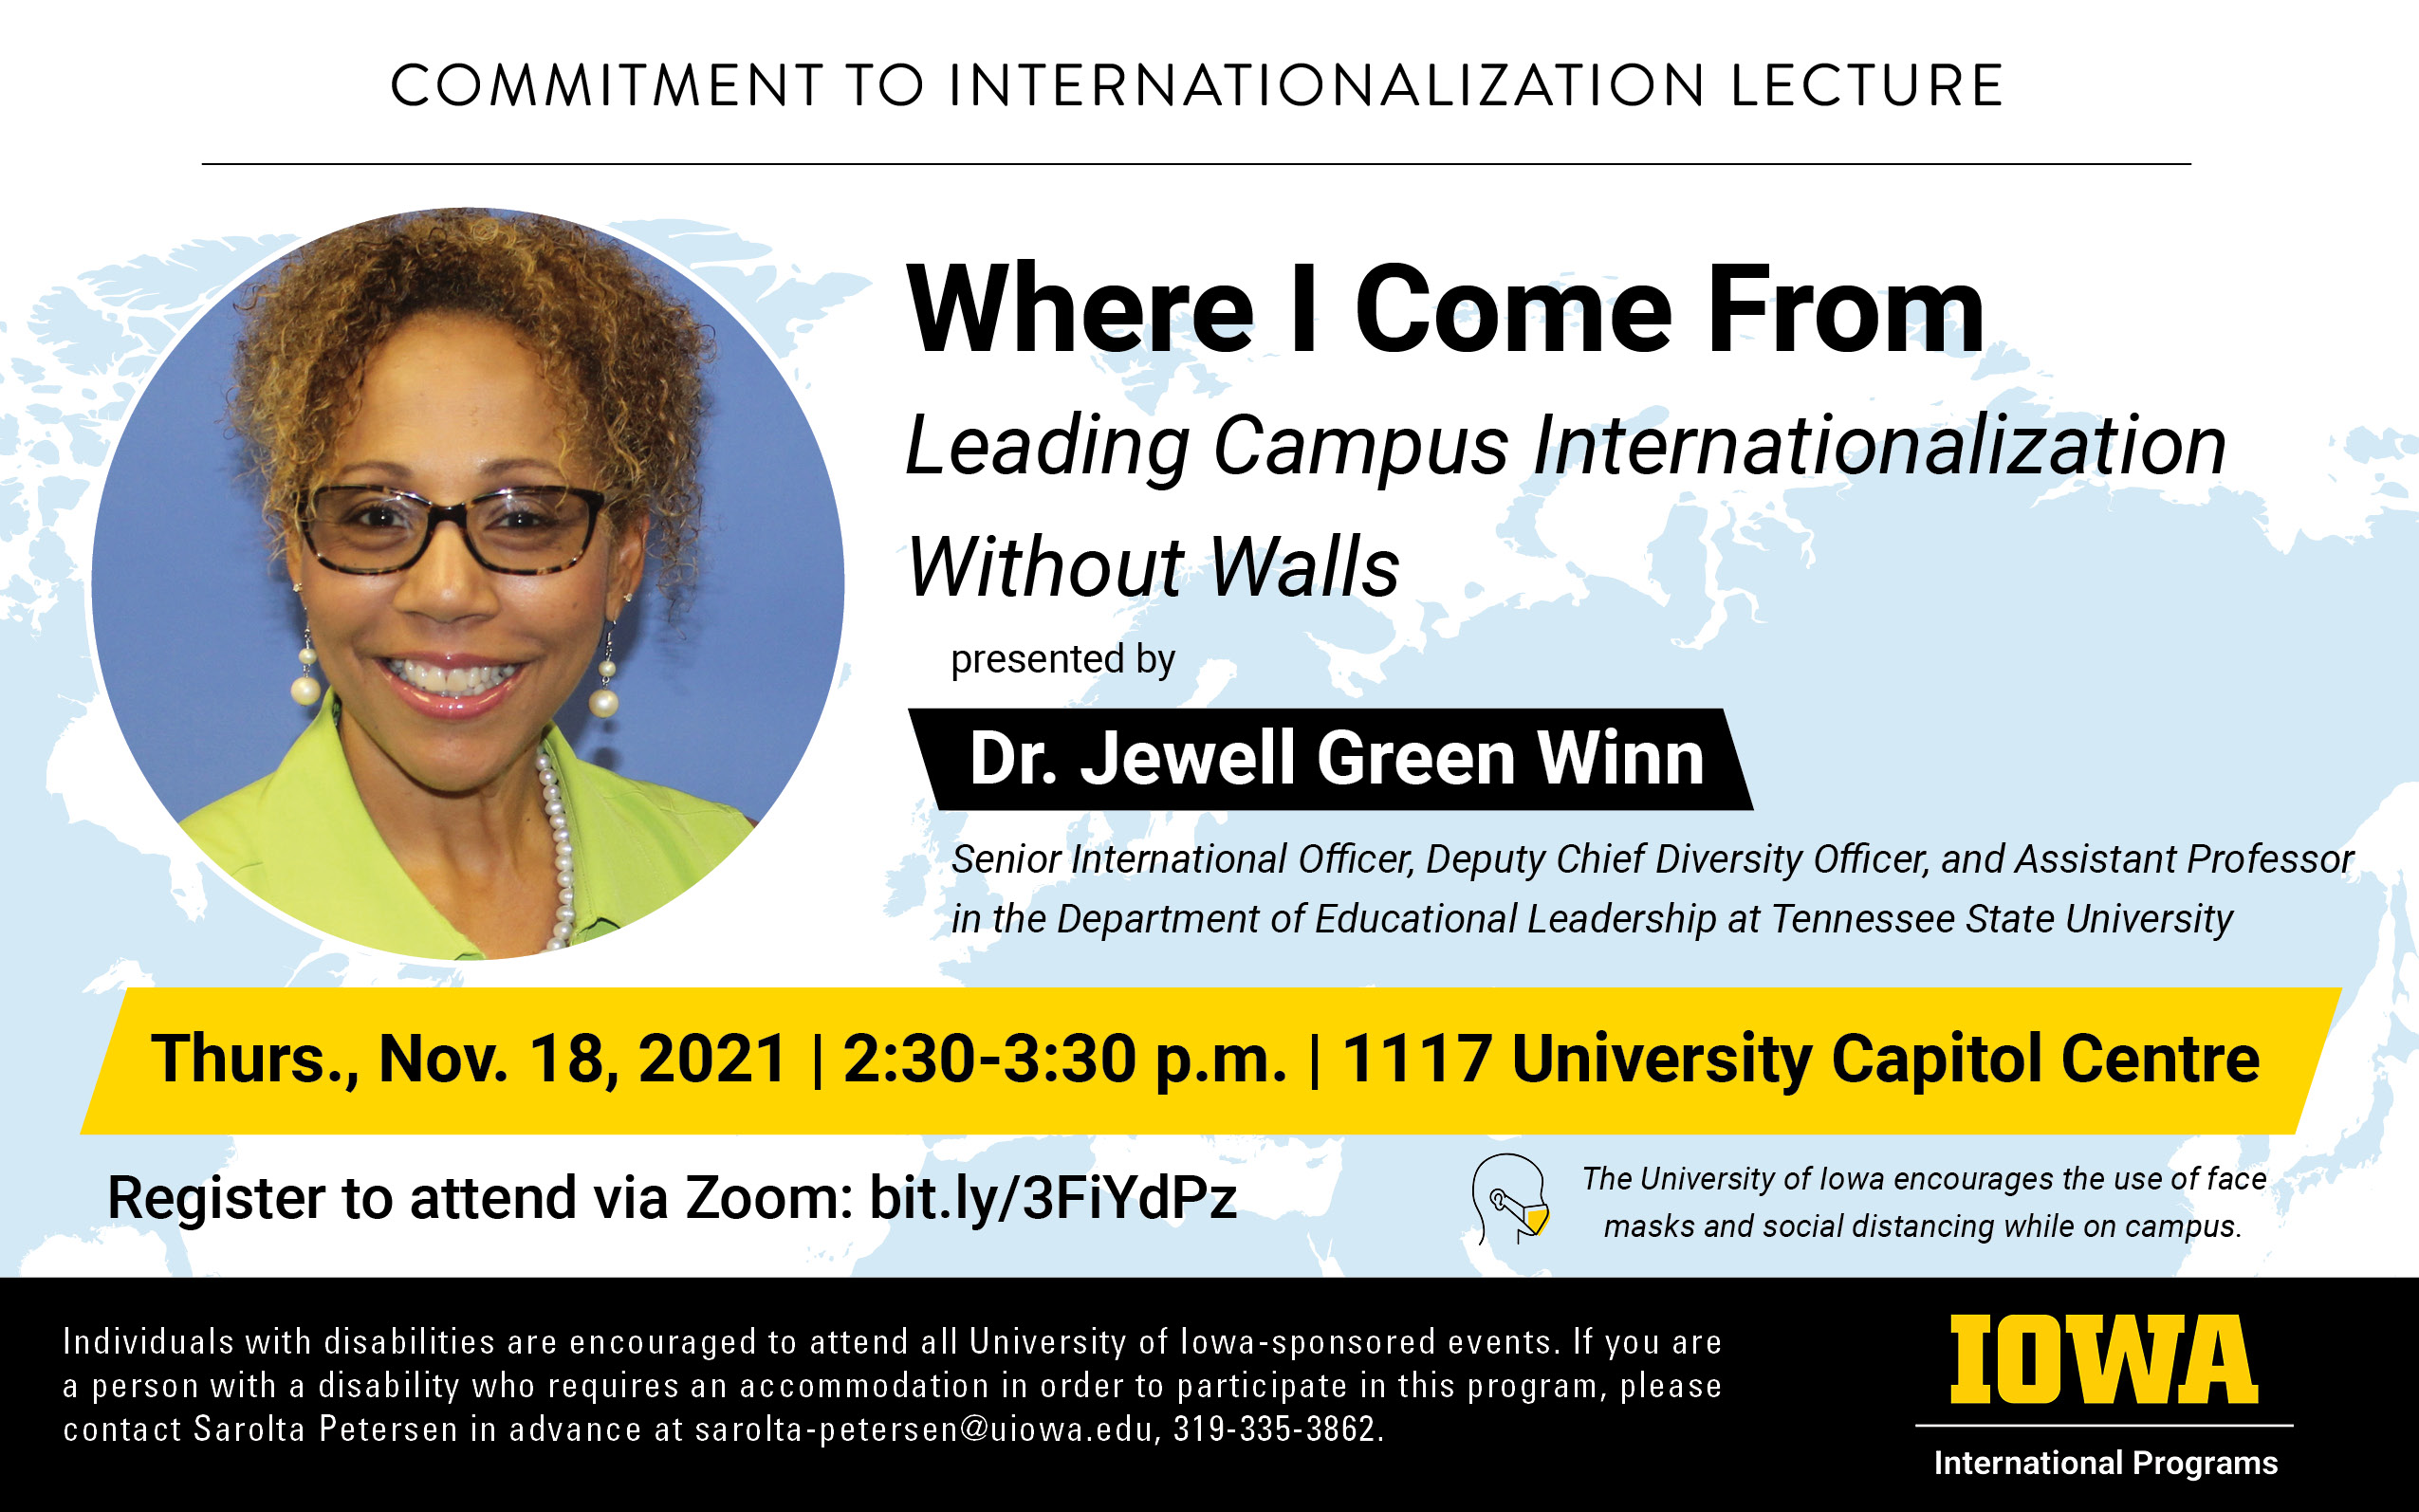 Commitment to internationalization lecture presented by Dr Jewell Green Winn titled Where I come from, leading campus internationalization without walls. Senior International office, deputy chief diversity officer. and assistant professor in the department of educational leadership at Tennessee State University Thursday November 18 2021 at 2:20pm-3:30pm in 1117 University Capitol Center. Register to attend via Zoom at bit.ly/3FiYdPz. Face masks encouraged. Individuals with disabilities are encouraged to attend all University of Iowa-sponsored events. If you are a person with a disability who requires a reasonable accommodation in order to participate in this program, please contact Sarolta Petersen in advance at sarolta-petersen@uiowa.edu 319 335 3862